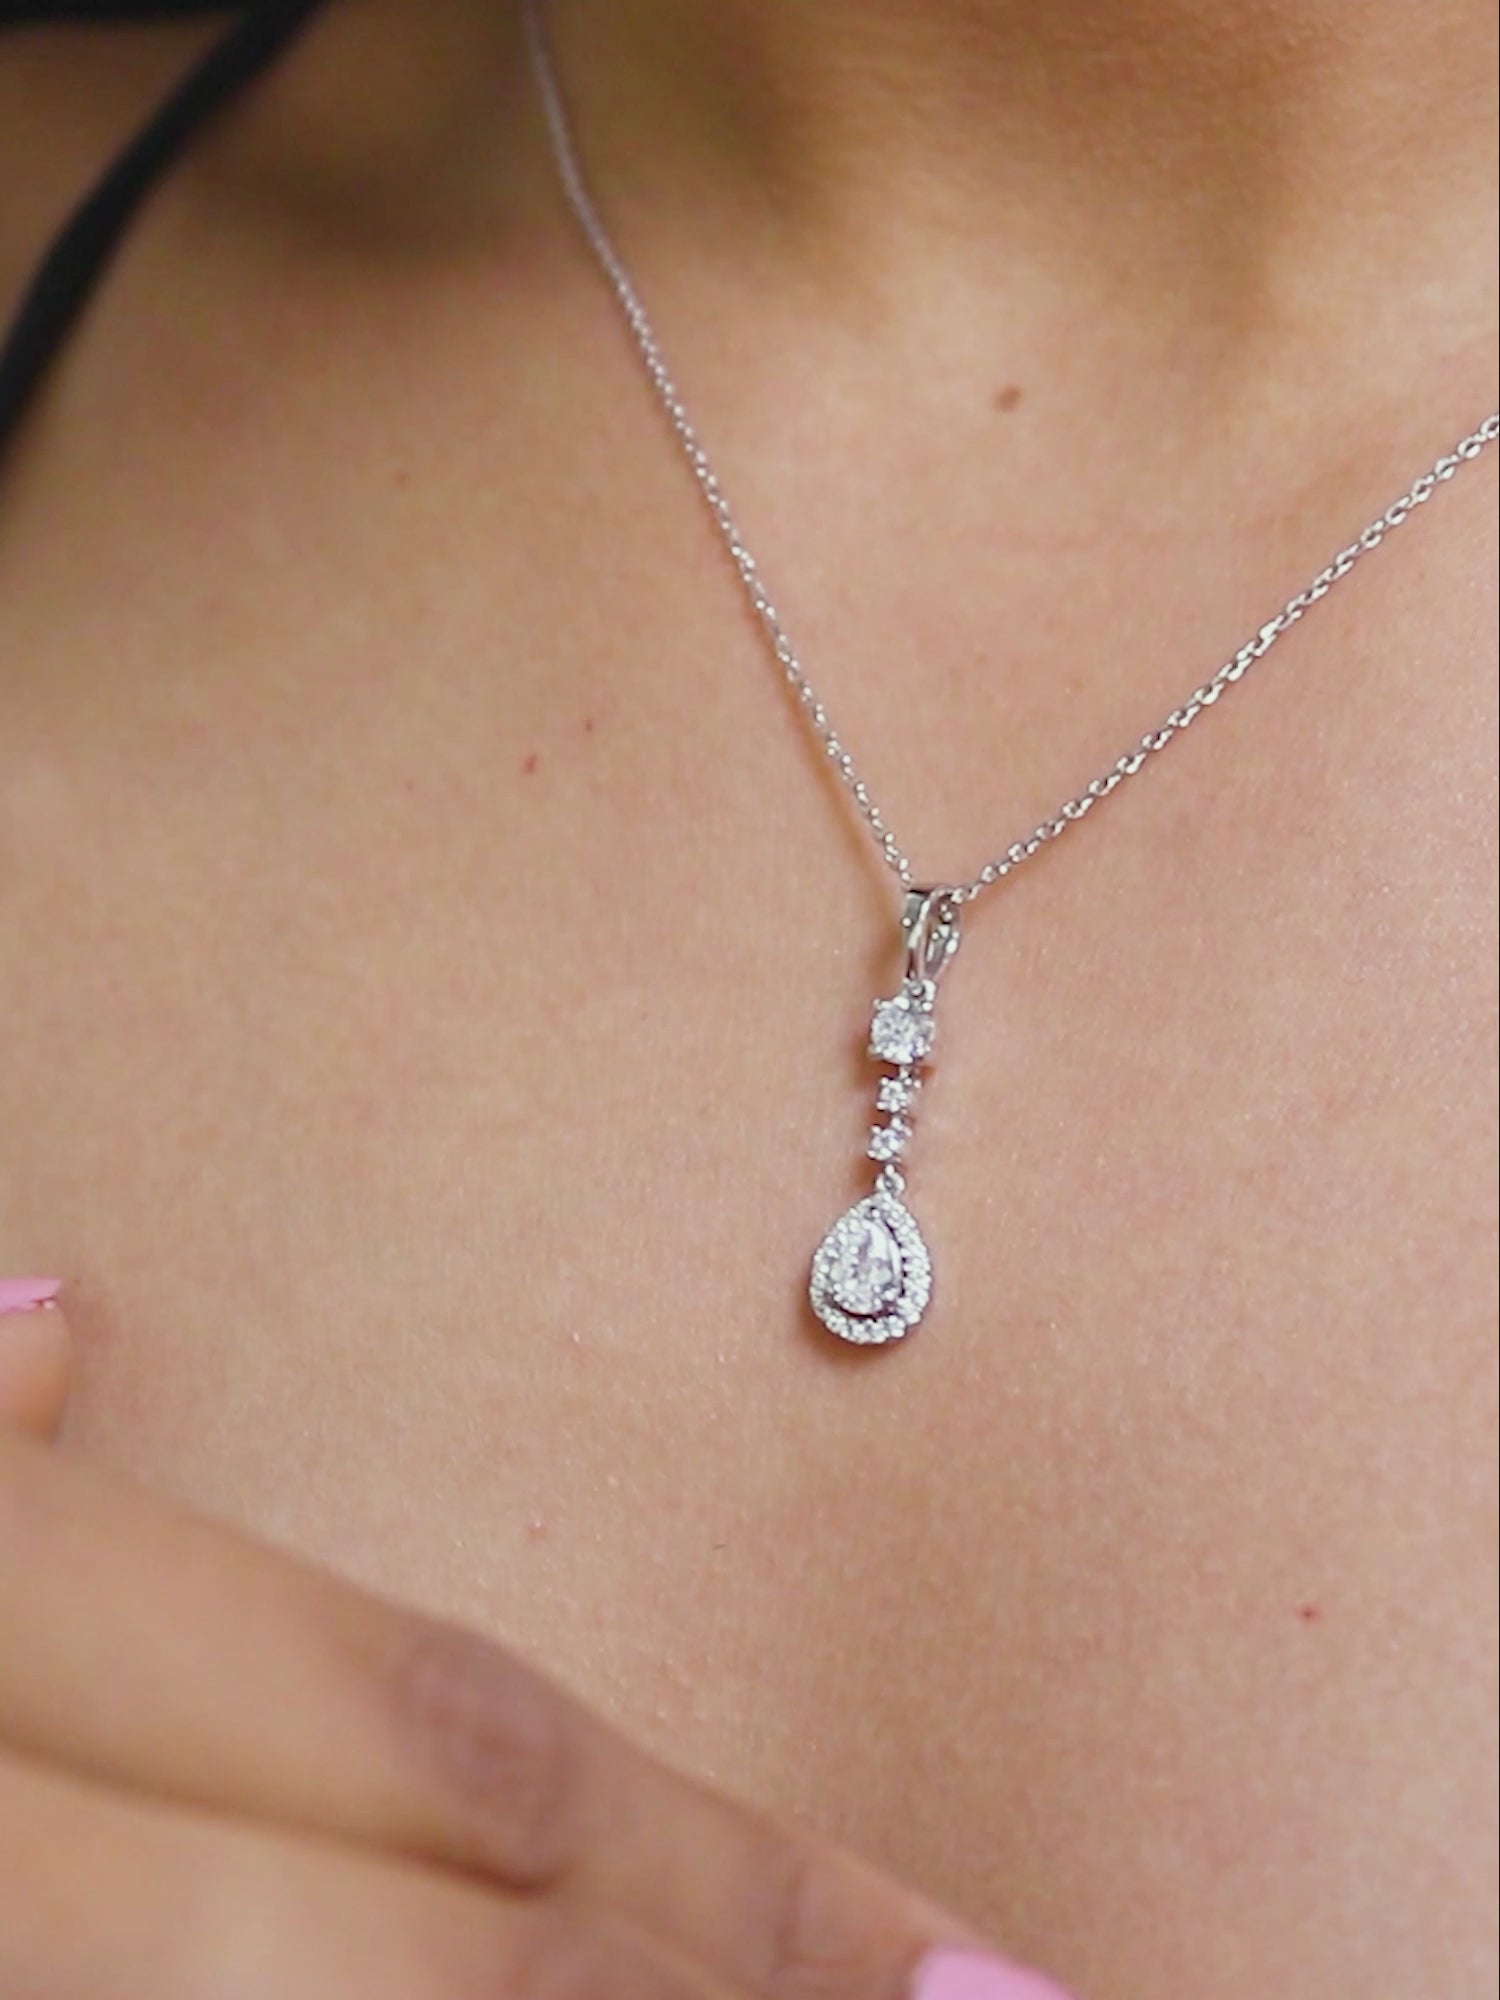 TEAR DROP EARRING AND NECKLACE SET WITH AMERICAN DIAMONDS-3